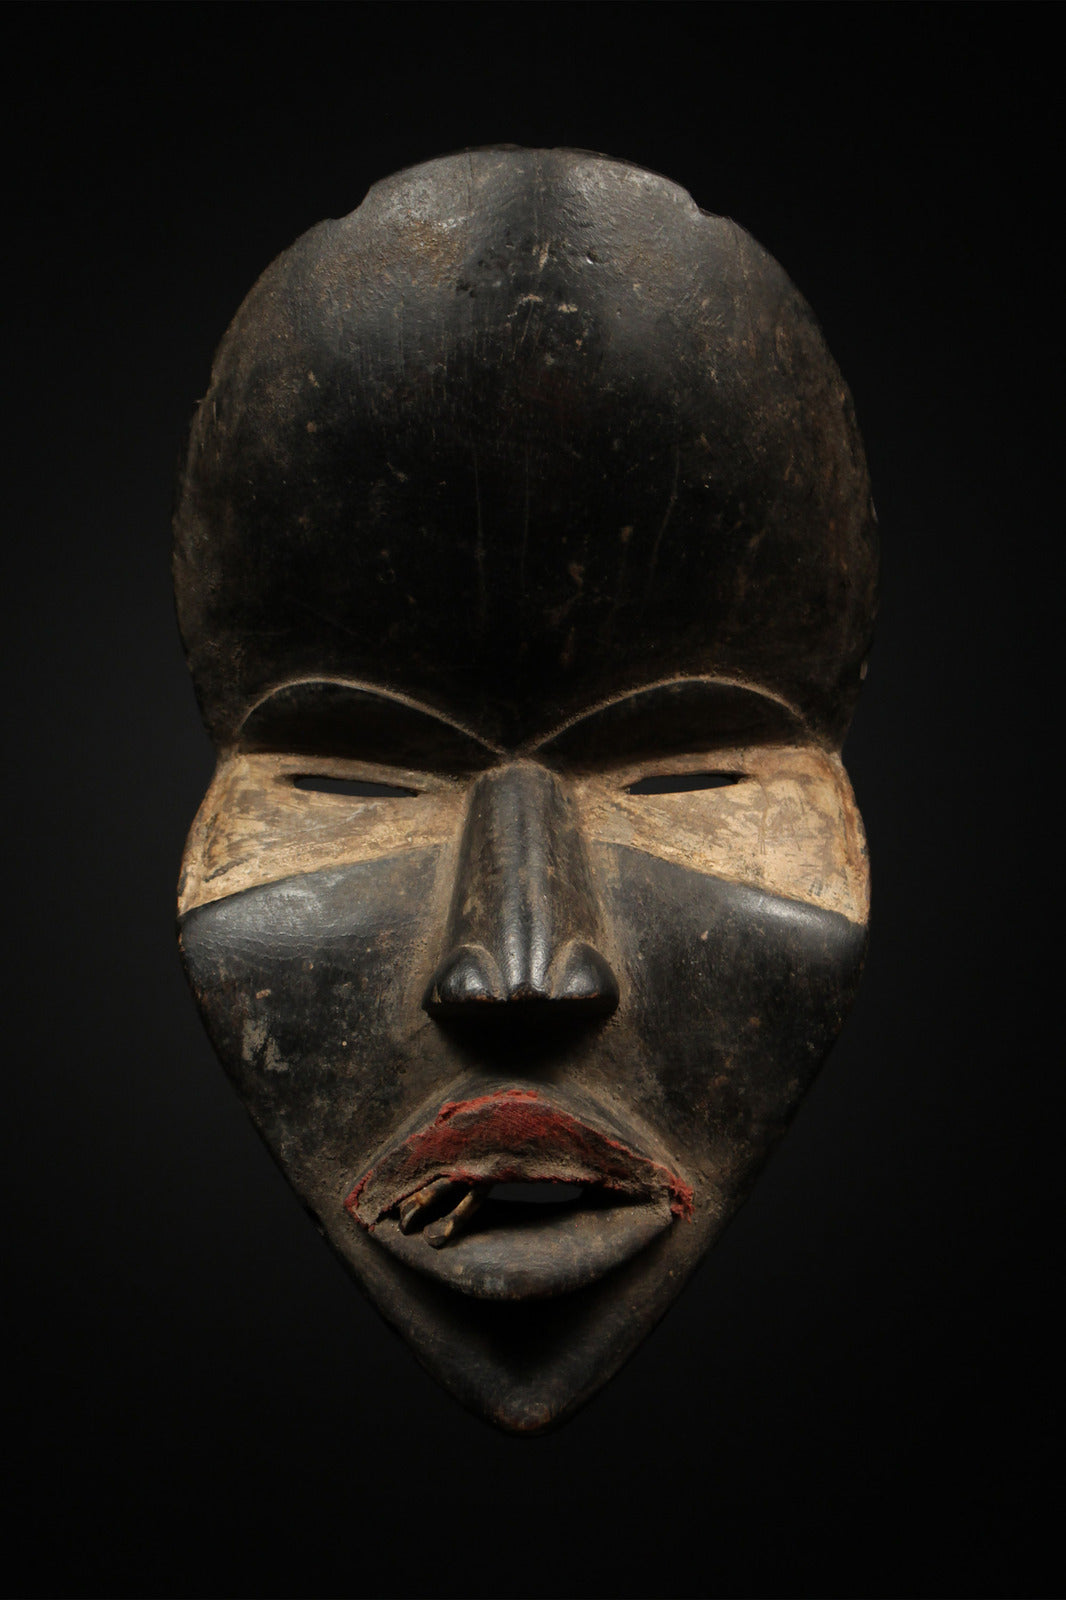 Tribal Masks - Traditional - Folk Art - African - Objects - Artifacts - Sculptures - Collectible - Cultural Sophistication - Home - Intricately - Carved Wooden Deangle Mask - Dan Tribe - Ivory Coast - Handcrafted Wood - Unique Beauty - Decor - Authentic - Statement